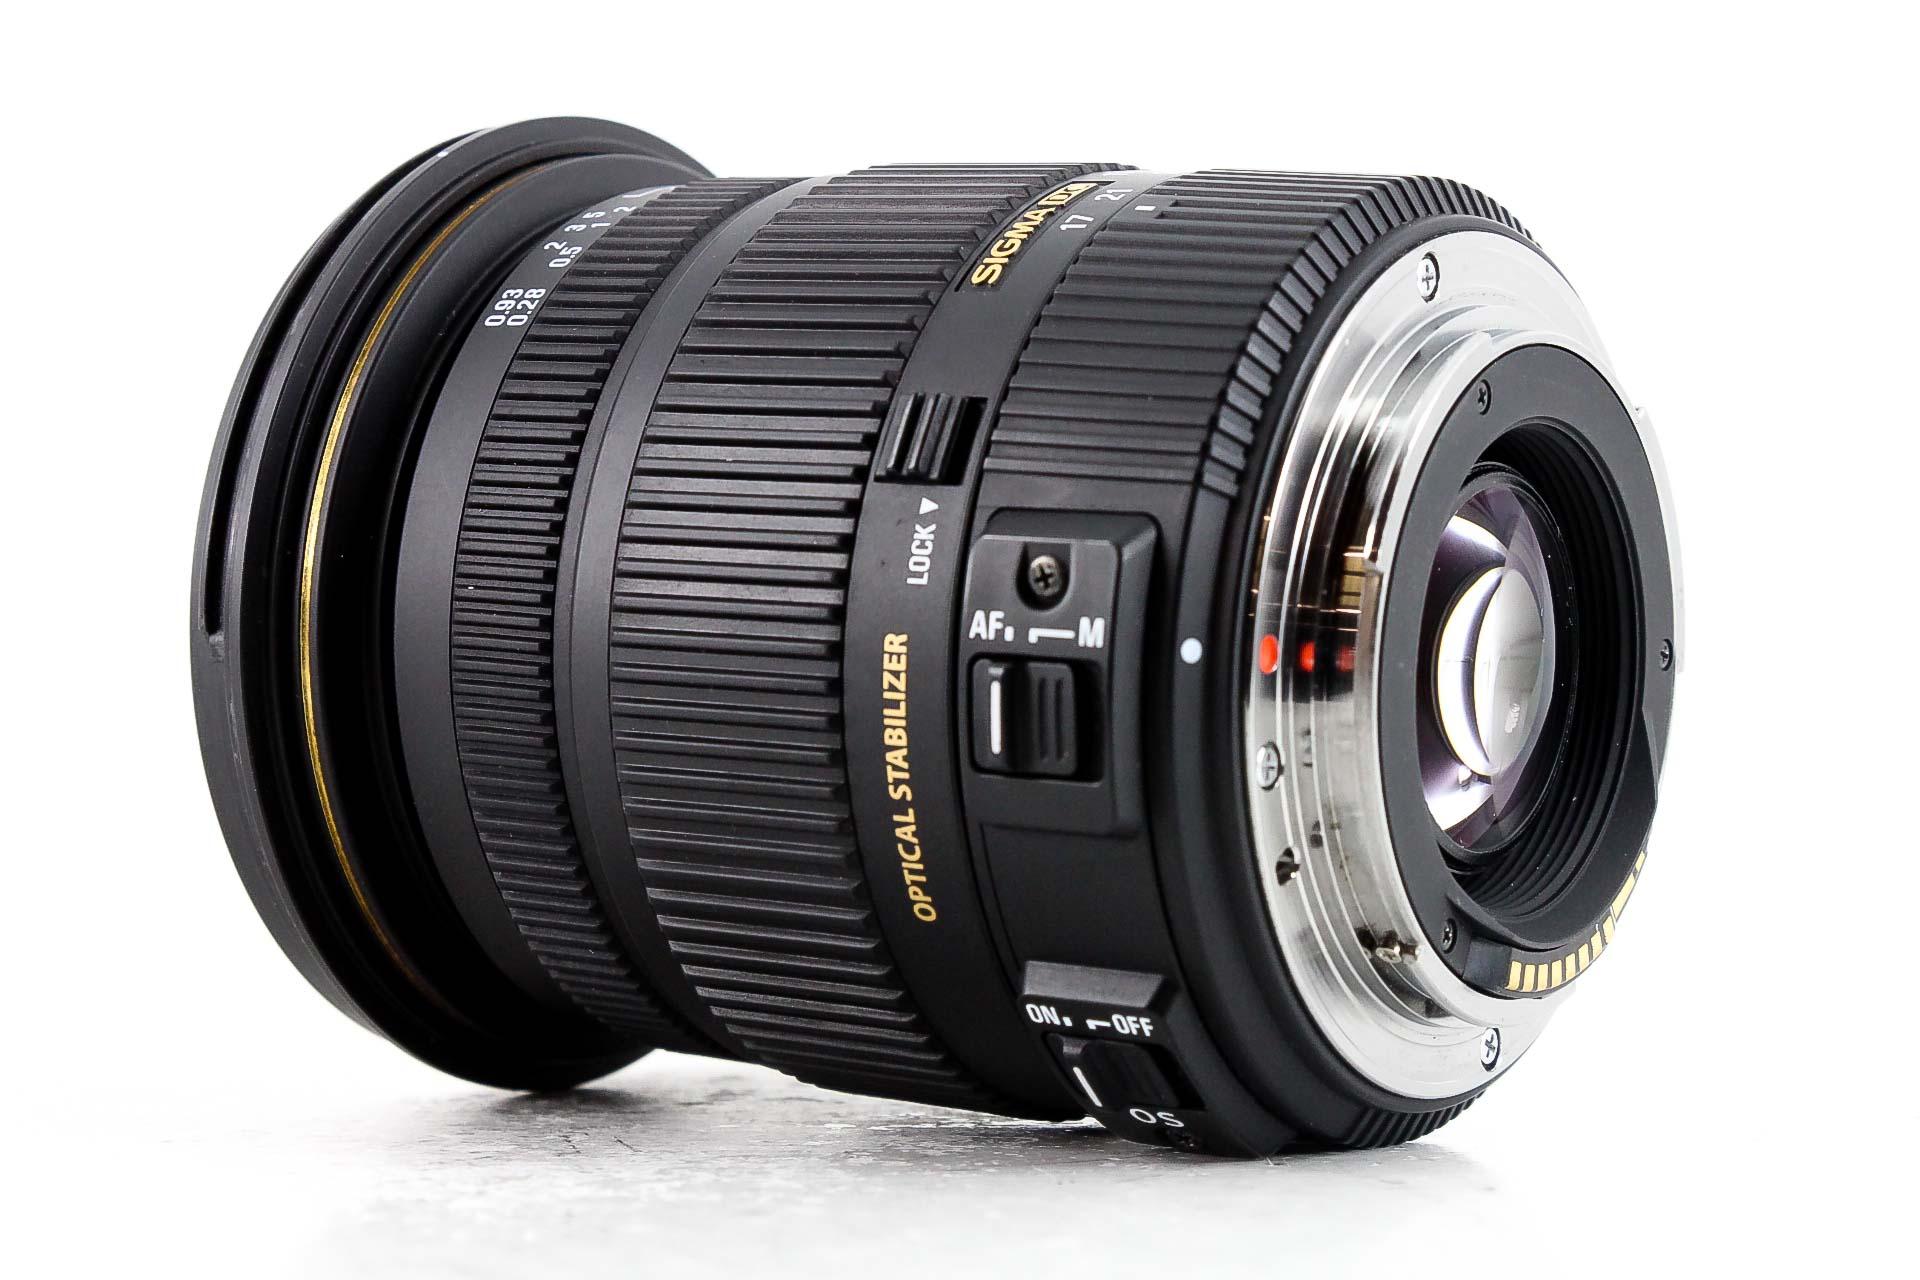 Sigma 17-50mm F2.8 EX DC OS HSM Lens for Canon - Lenses and Cameras